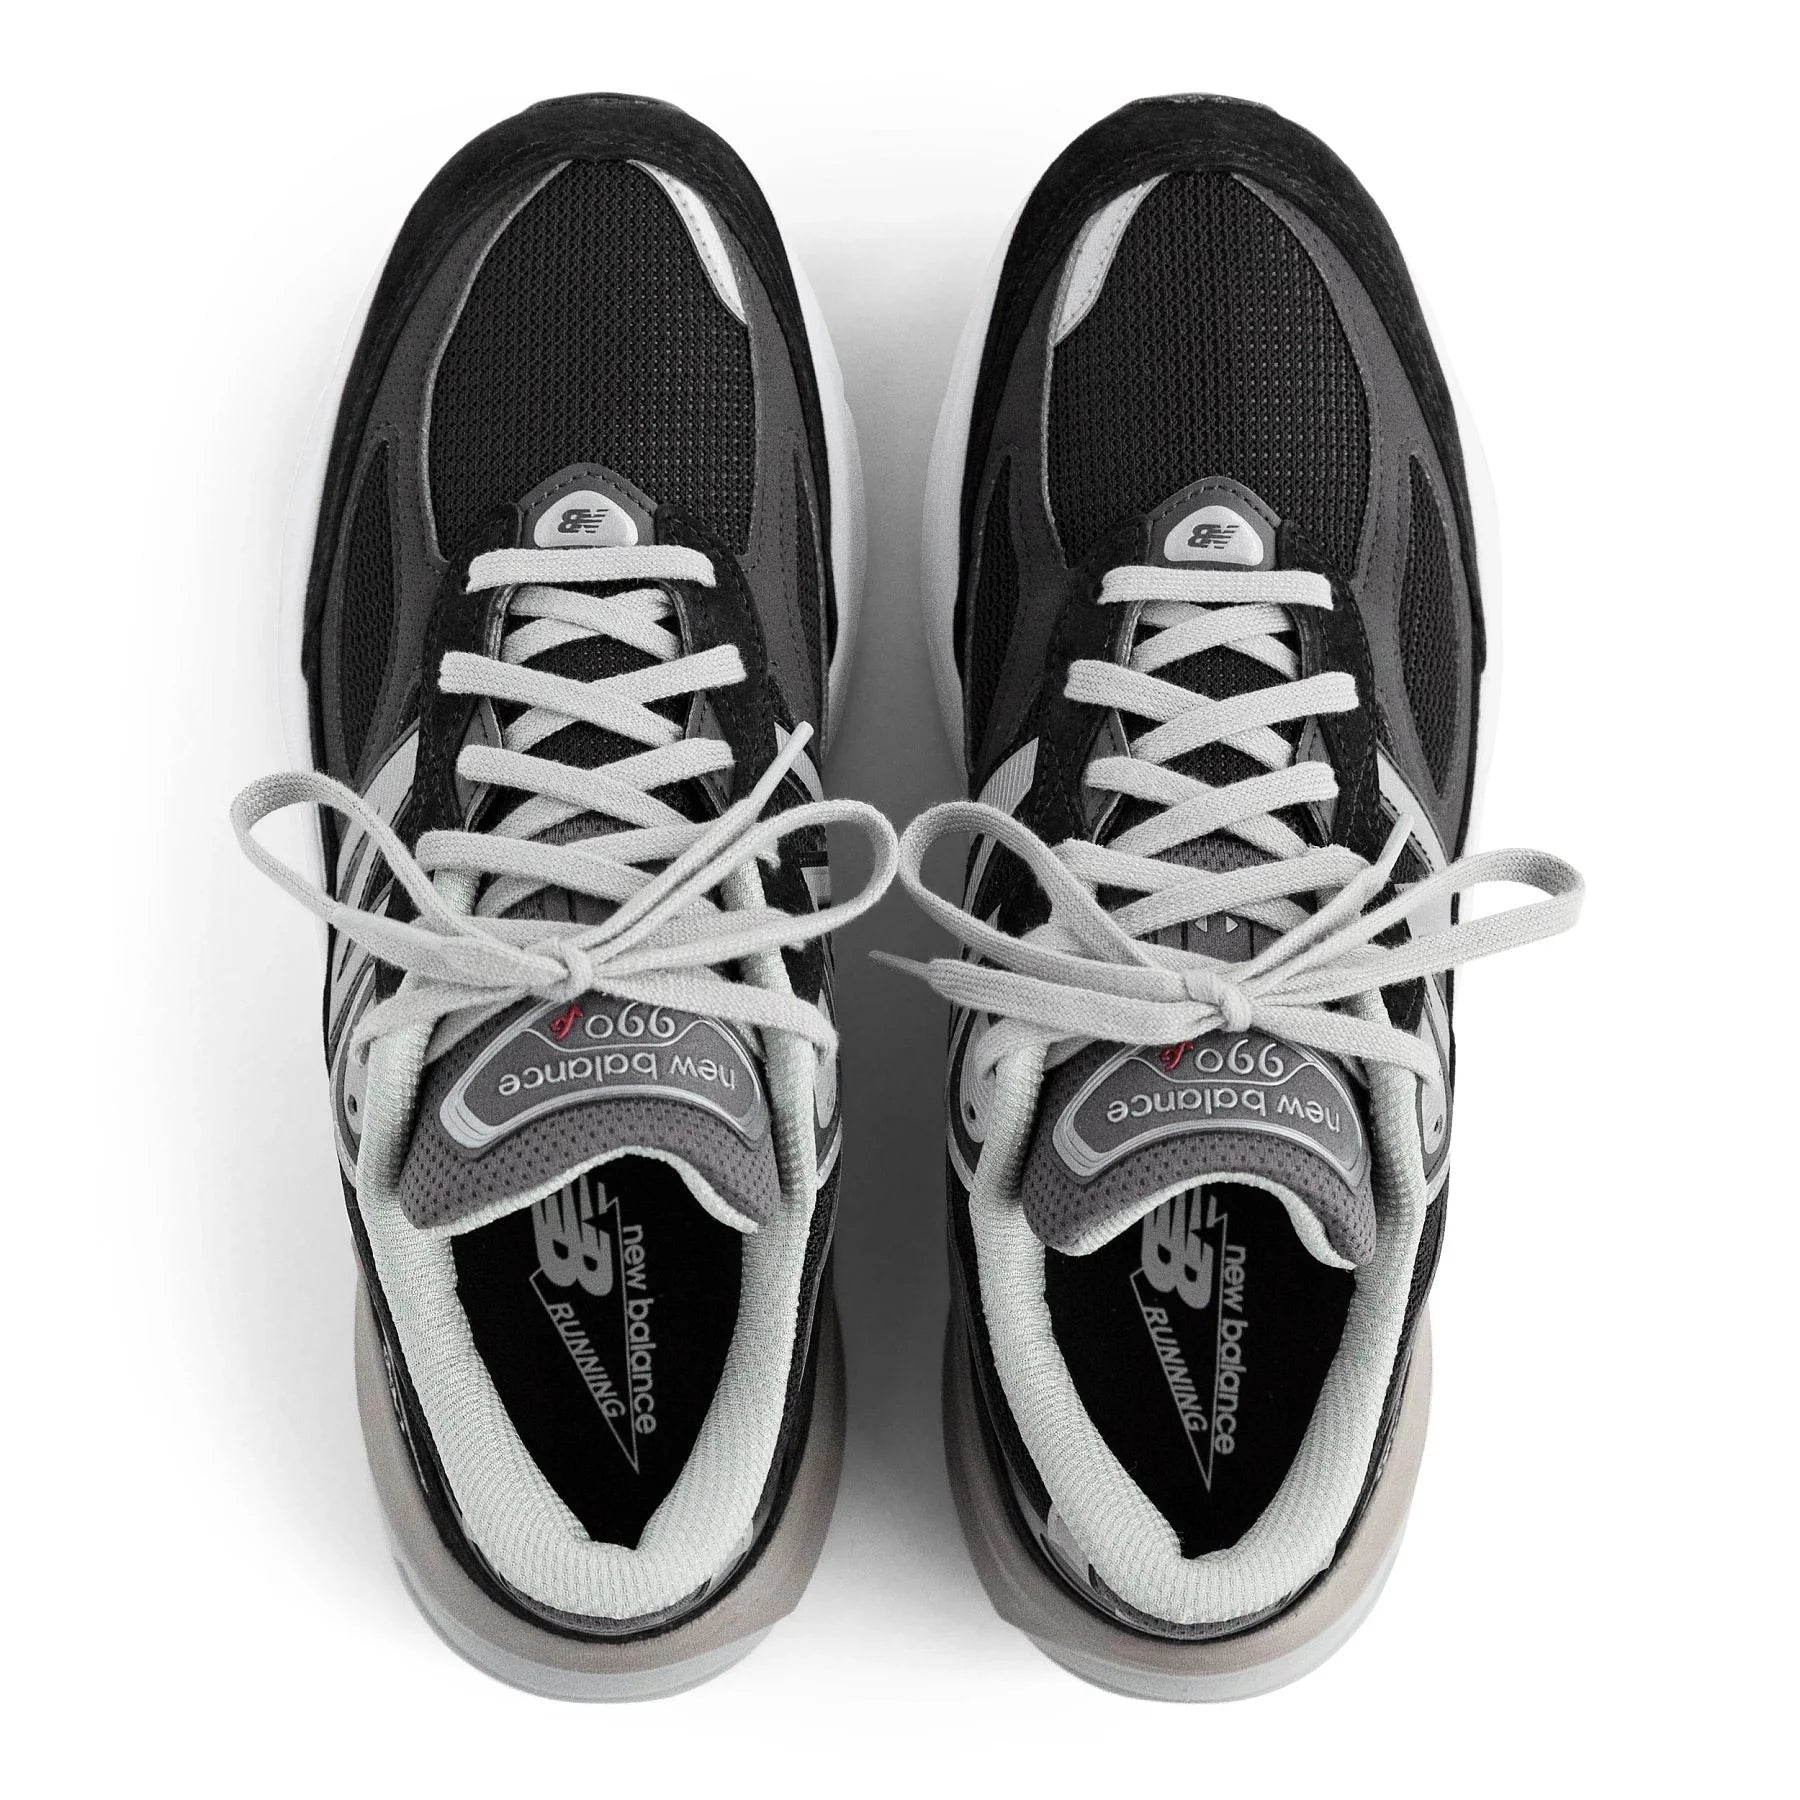 Top view of the Men's New Balance 990 V6 lifestyle shoe in the color Black/White